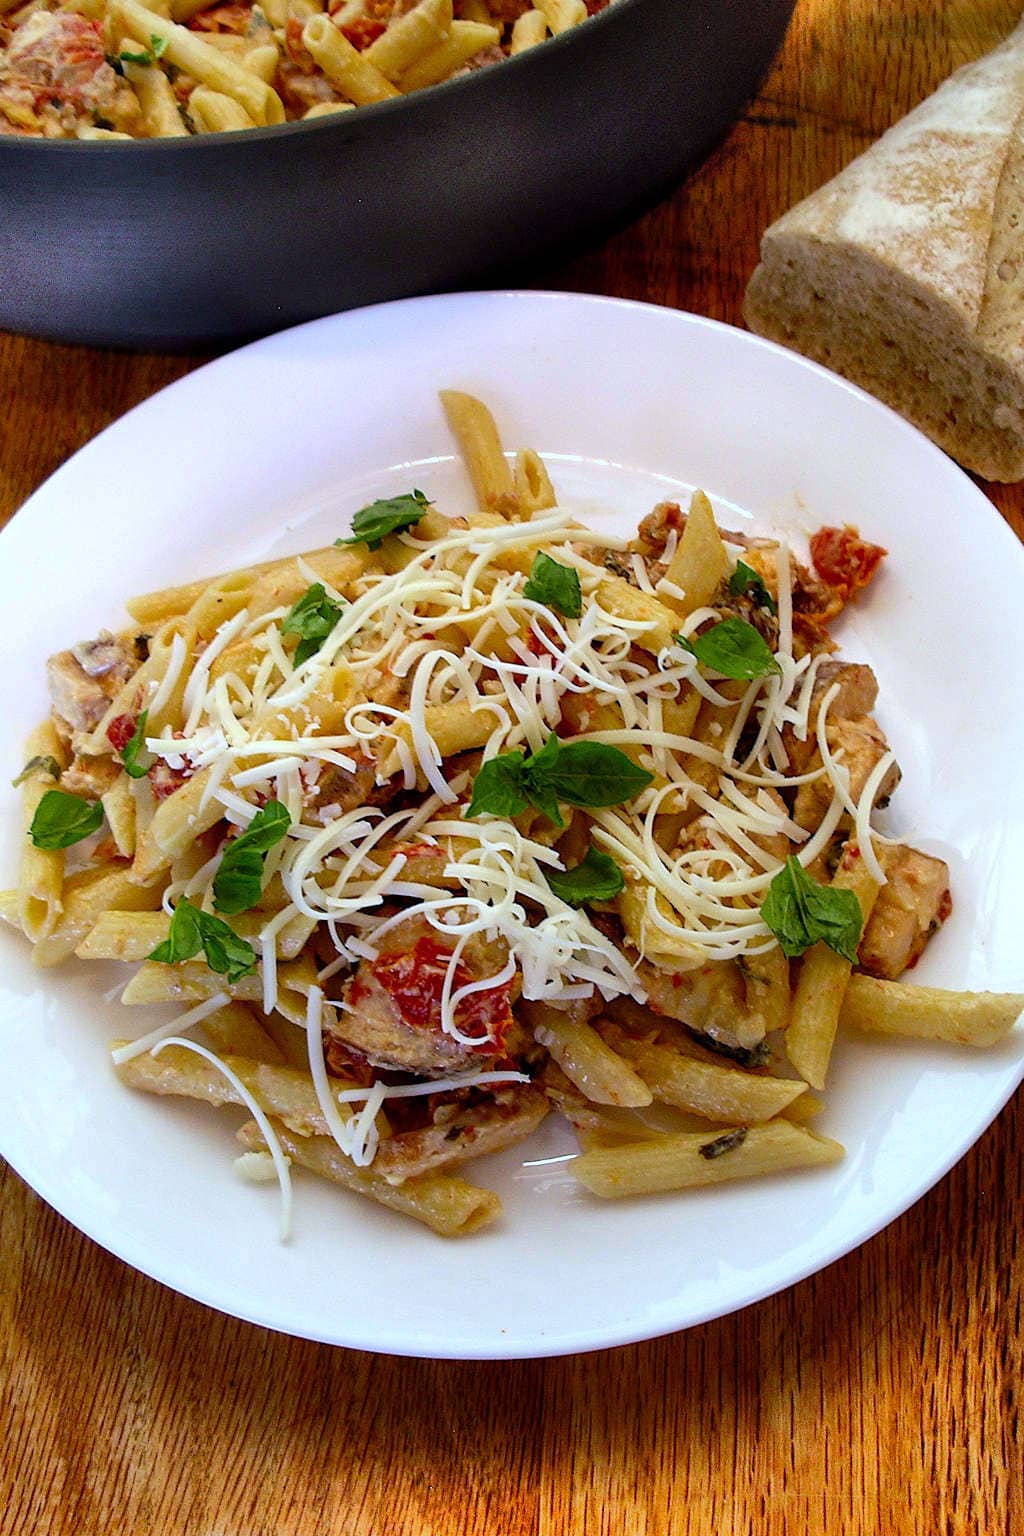 Penne and Smoked Chicken, bread and pan